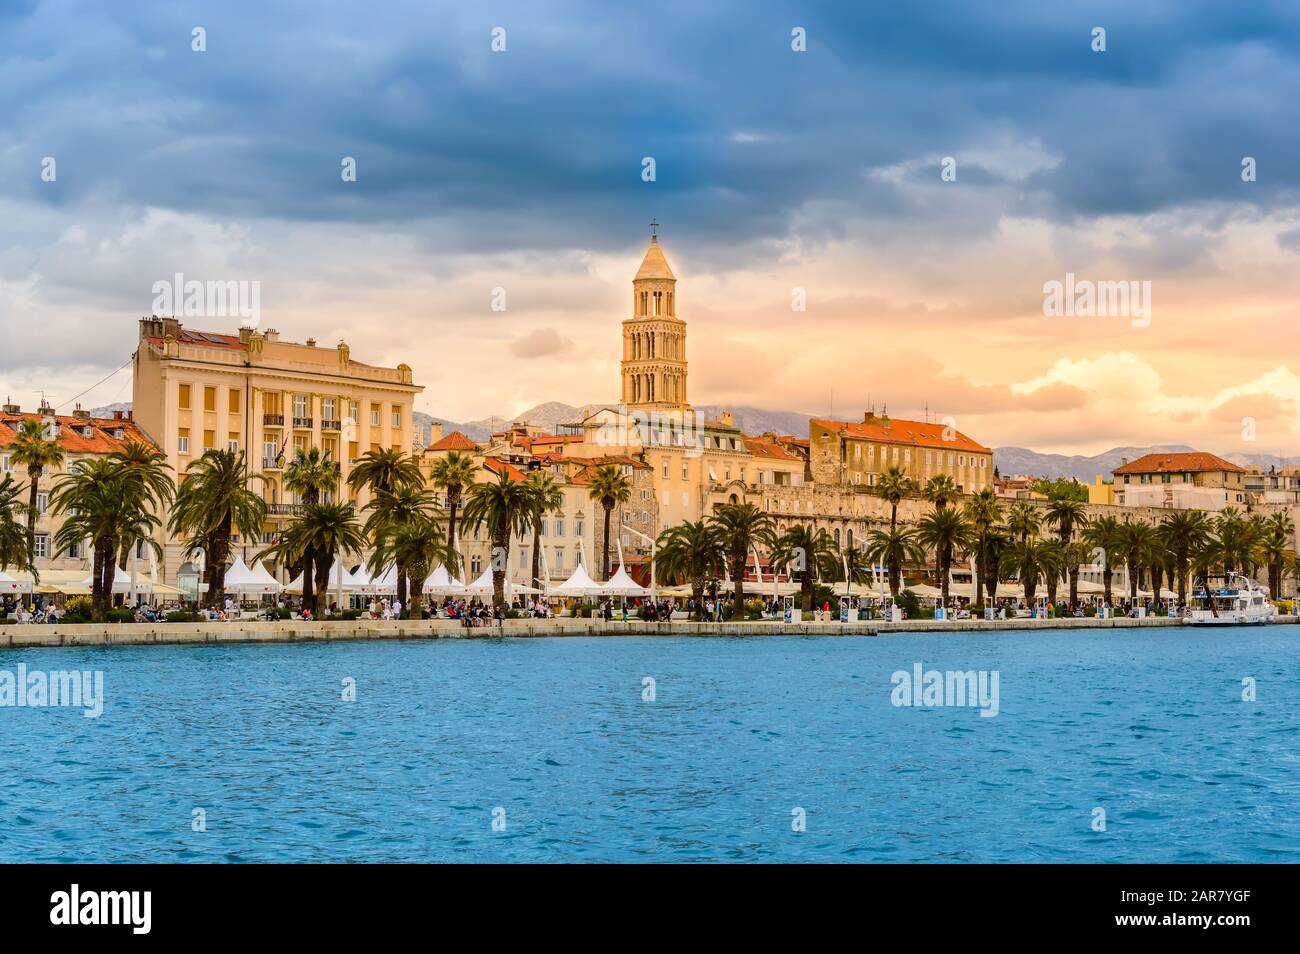 Split, Croatia - May 21, 2019: Split old town with Saint Domnius Cathedral, colorful buildings, Riva Promenade and palm trees. Vivid waterfront evenin Stock Photo